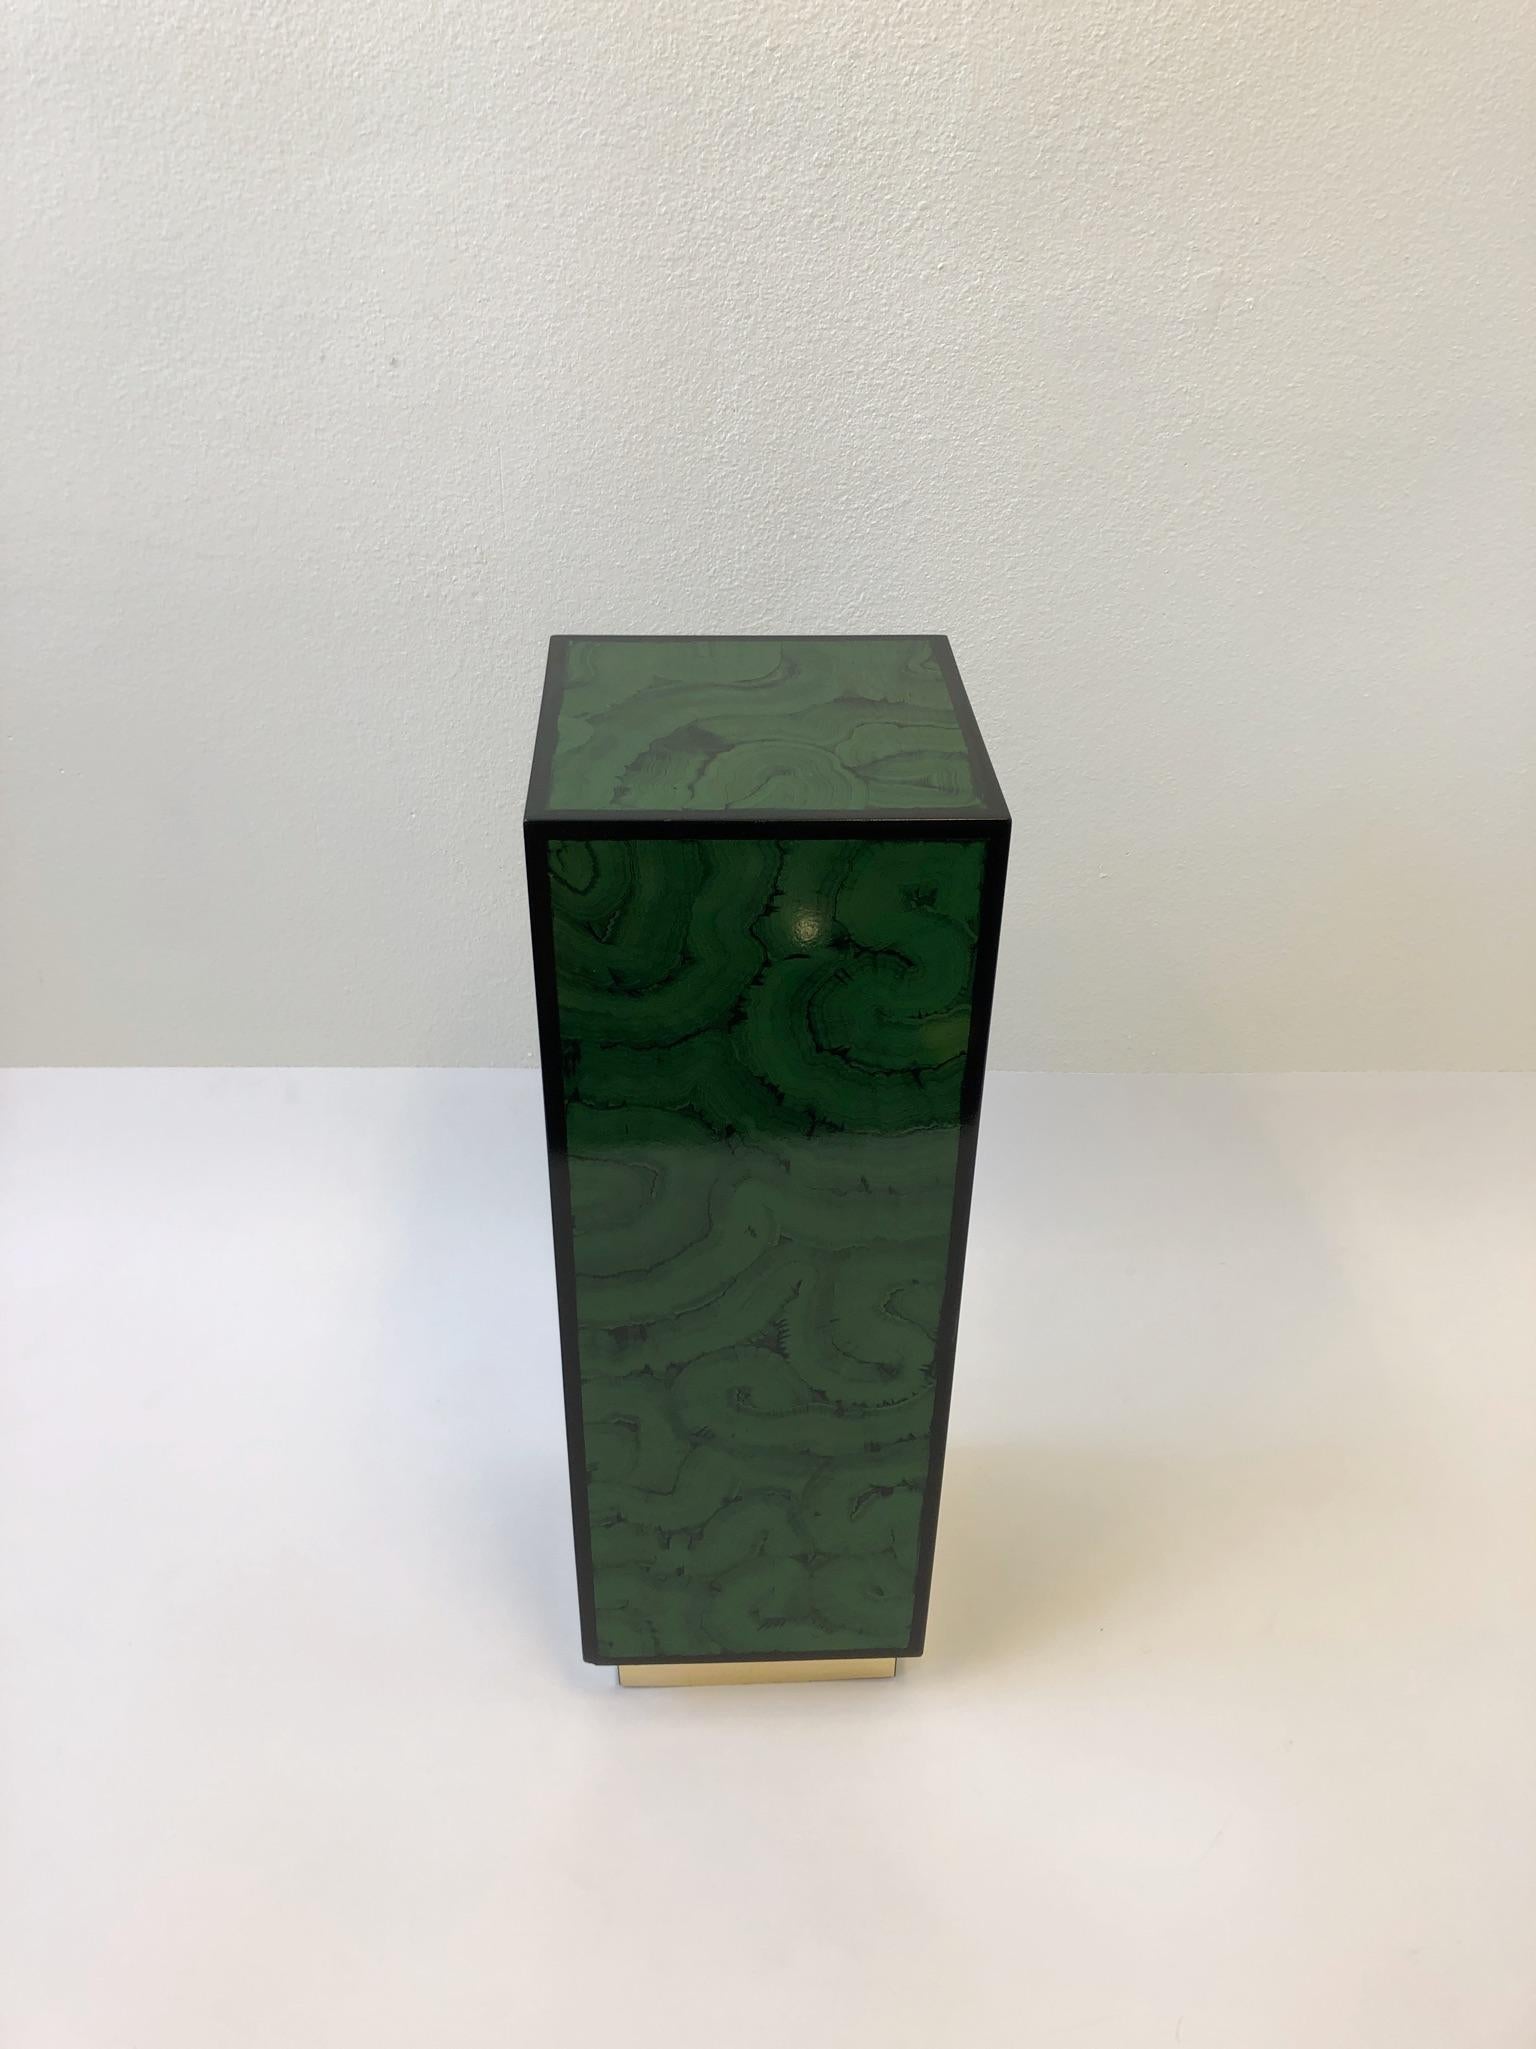 A glamorous 1970s faux malachite lacquer and brass modern pedestal. The pedestal is constructed of wood that’s lacquered in a malachite pattern and outlined black with a brass veneer base.
Dimensions: 12” deep, 12” wide, 36” high.